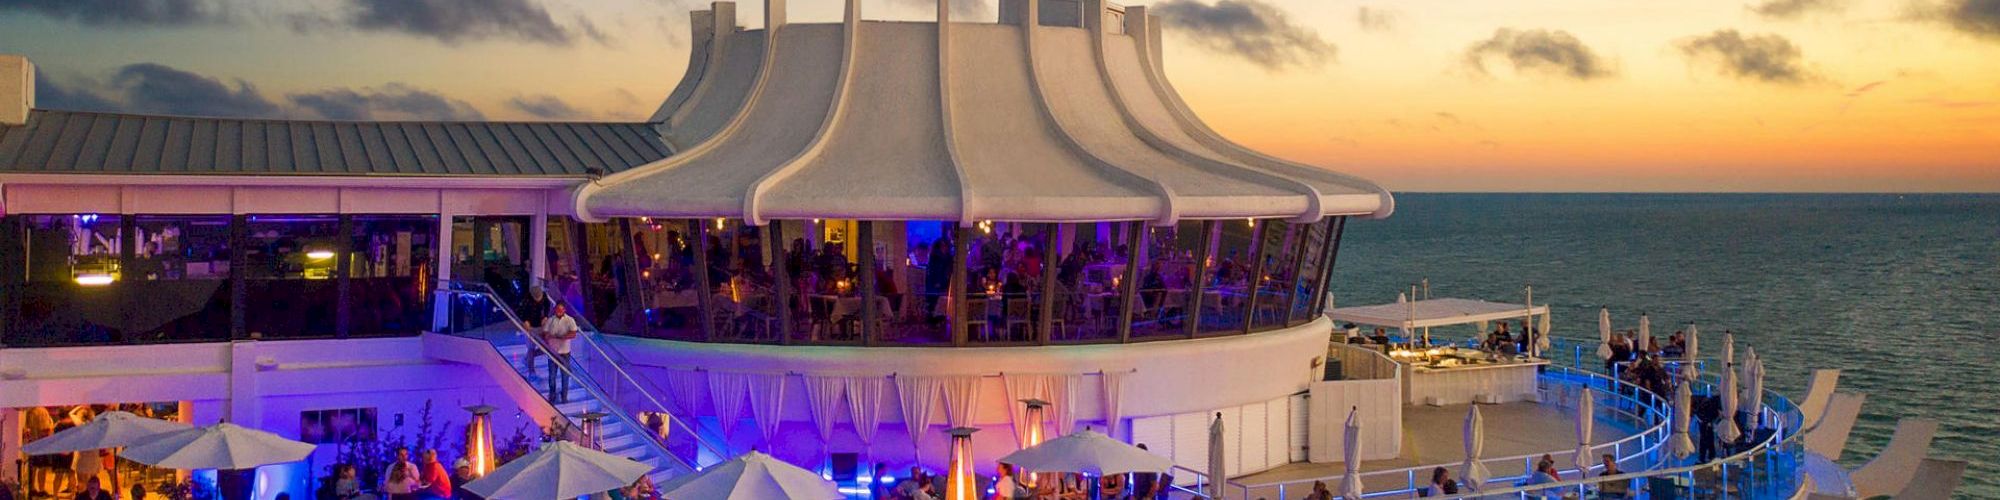 A cruise ship deck at sunset with people, seating areas, and a lit-up bar.